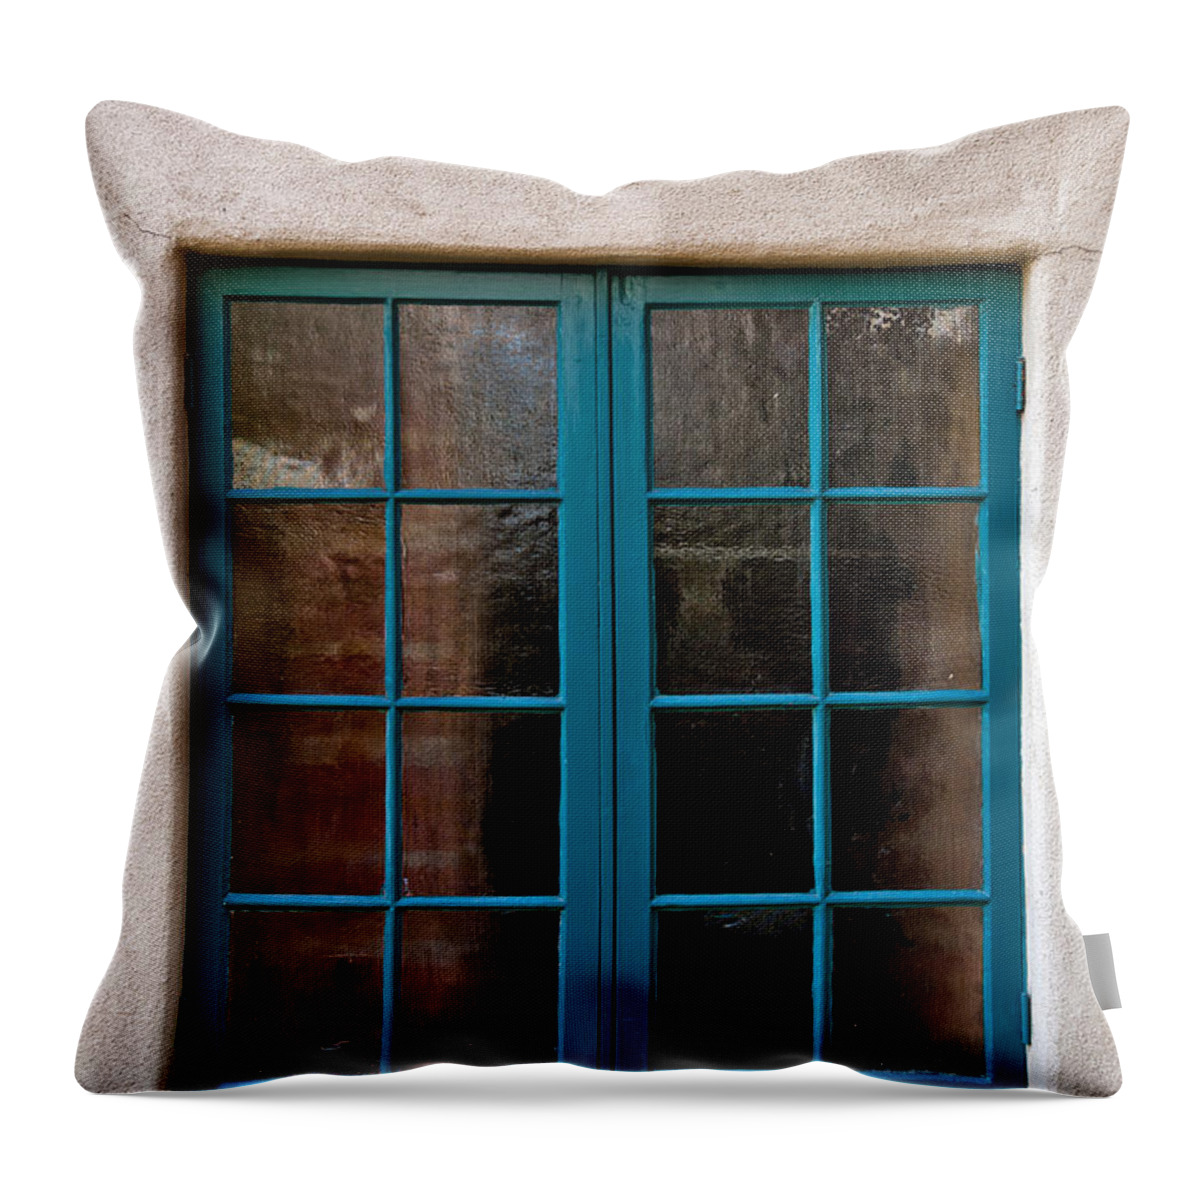 Architecture Throw Pillow featuring the photograph I Feel Your Pane by Peter Tellone